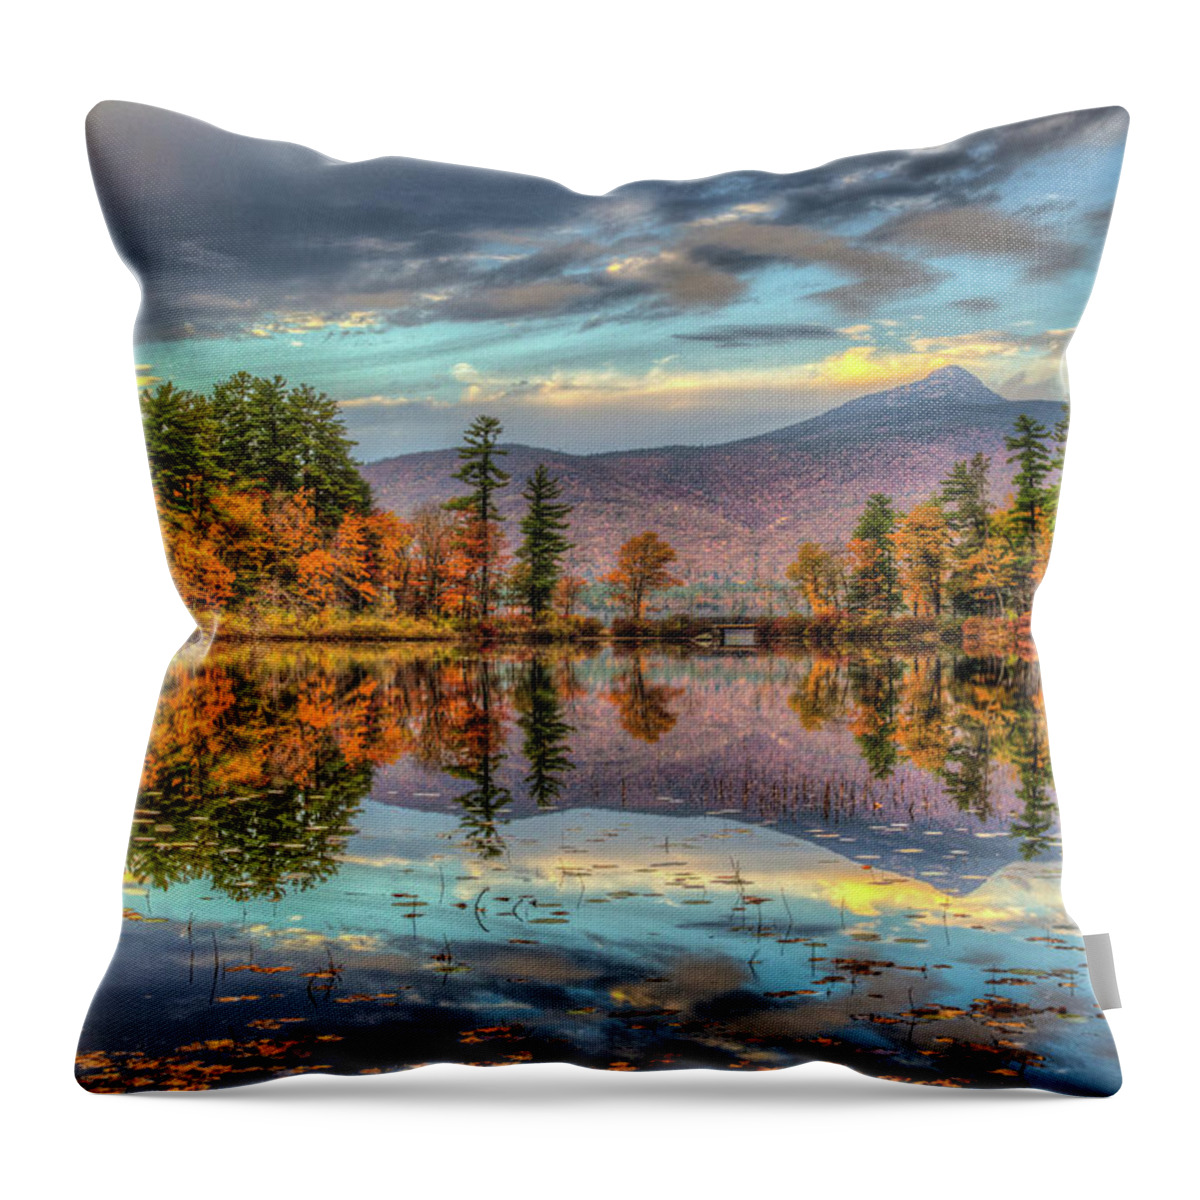 Scenics Throw Pillow featuring the photograph A Mountain And Its Lake by Joe Martin A New Hampshire Portrait Photographer